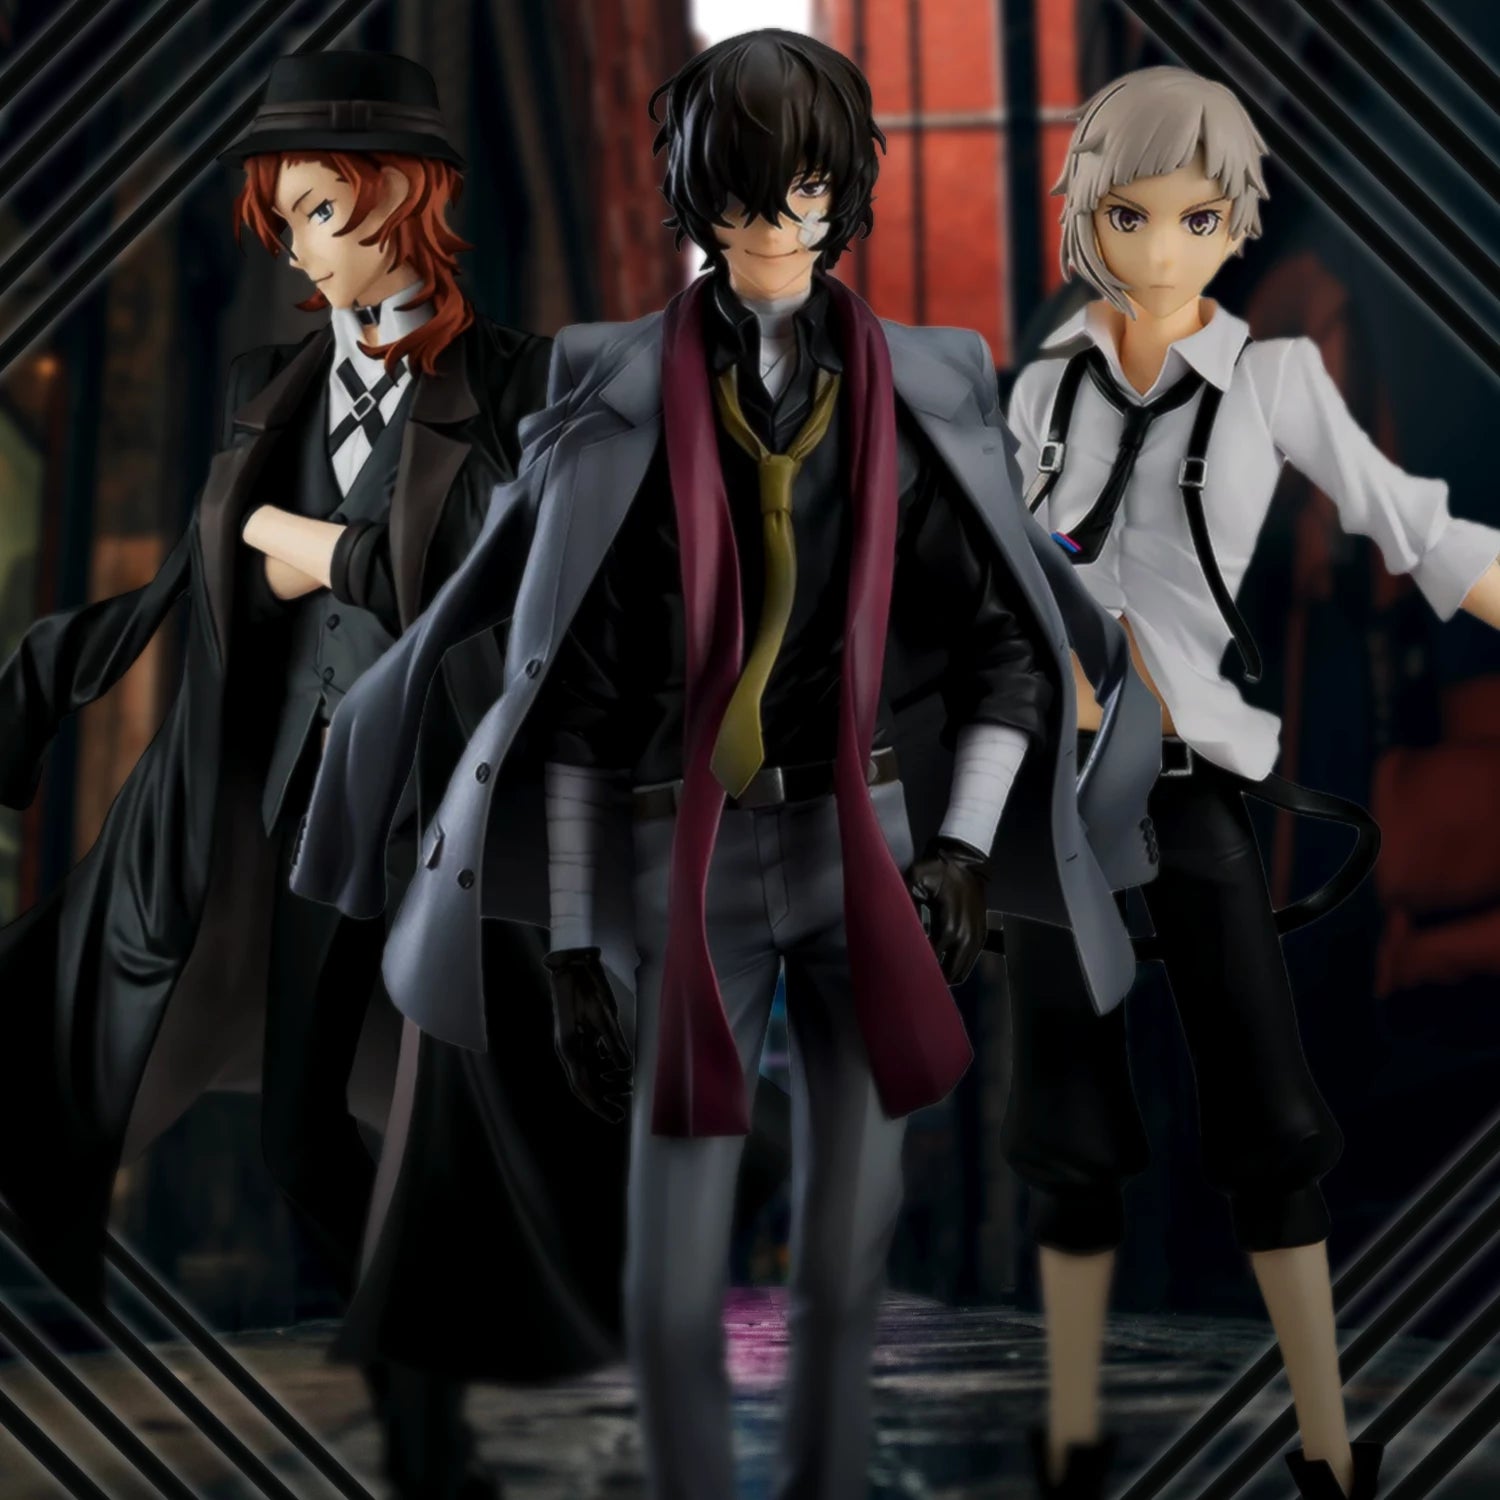 Bungo Stray Dogs (Bungou Stray Dogs) figures and goods